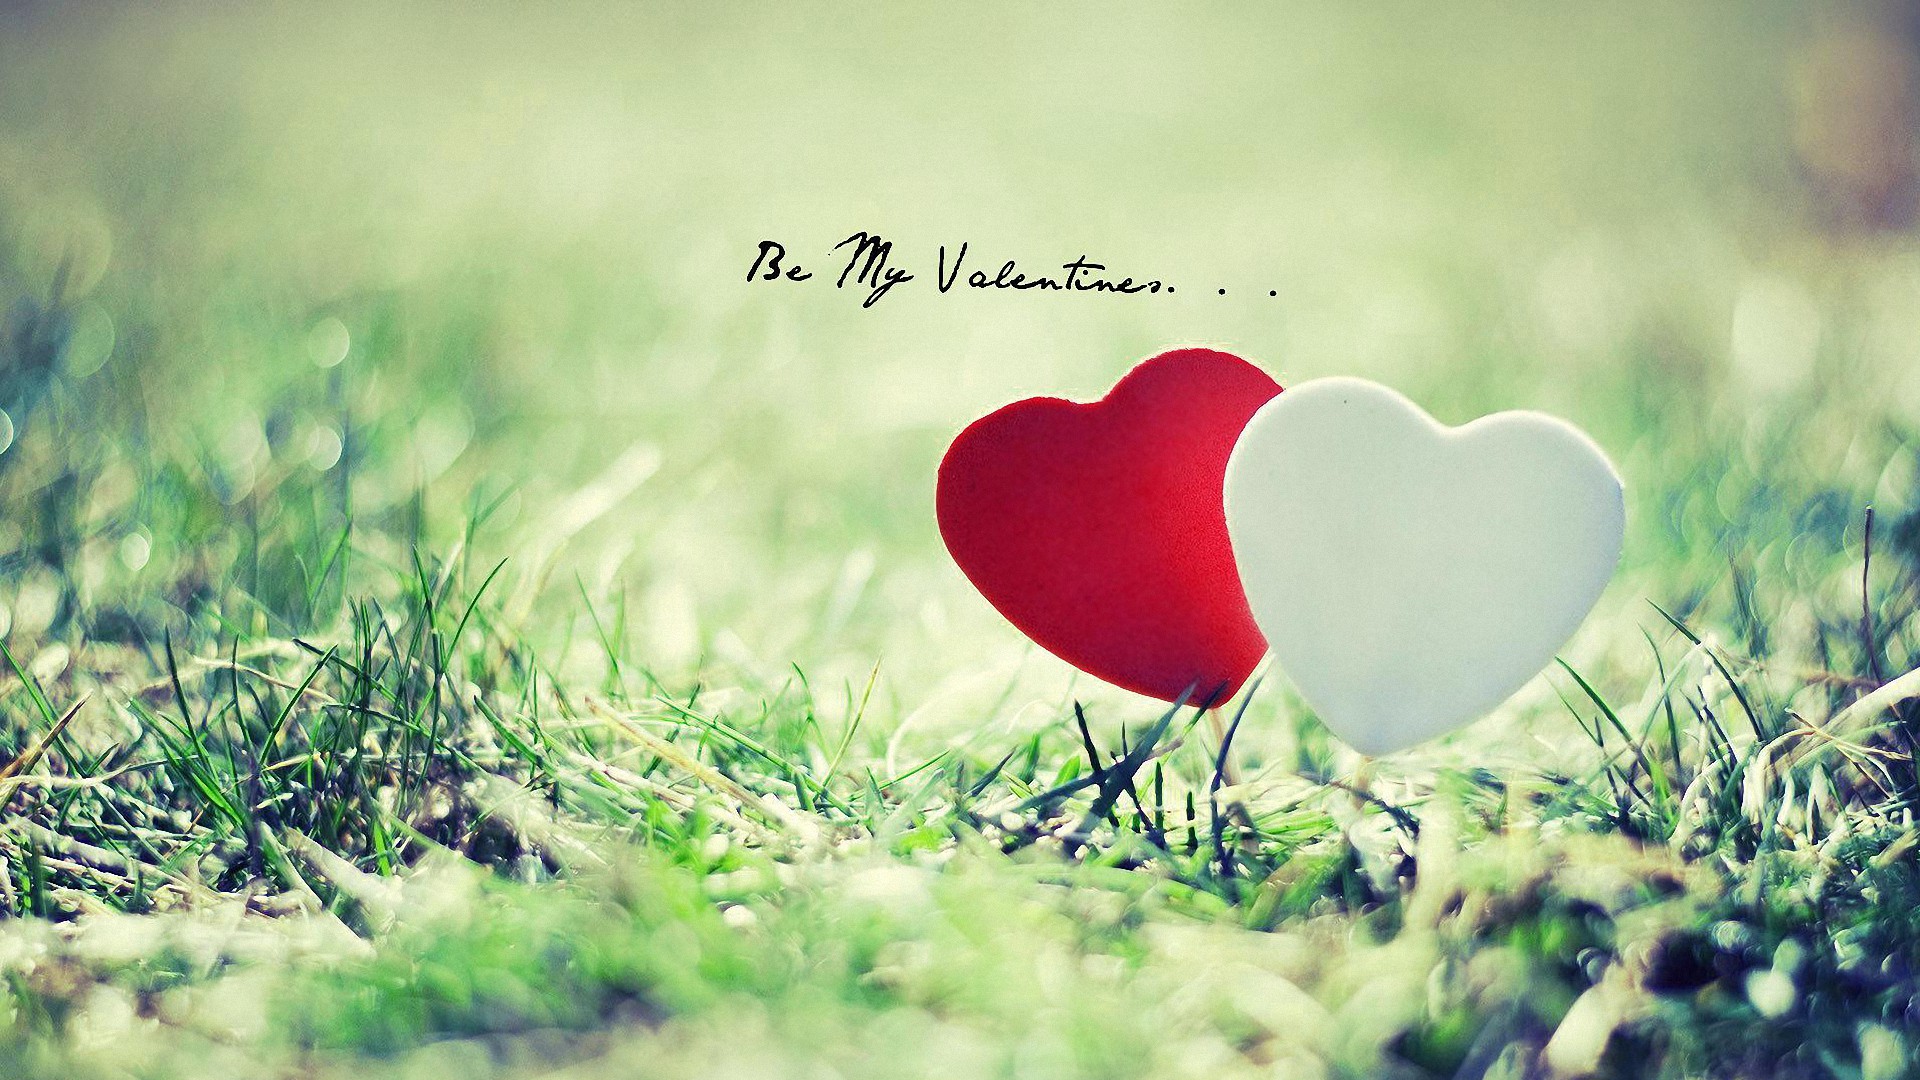 Heart-hd Wallpapers Free Download - Couple Background Images Hd - 1920x1080  Wallpaper 